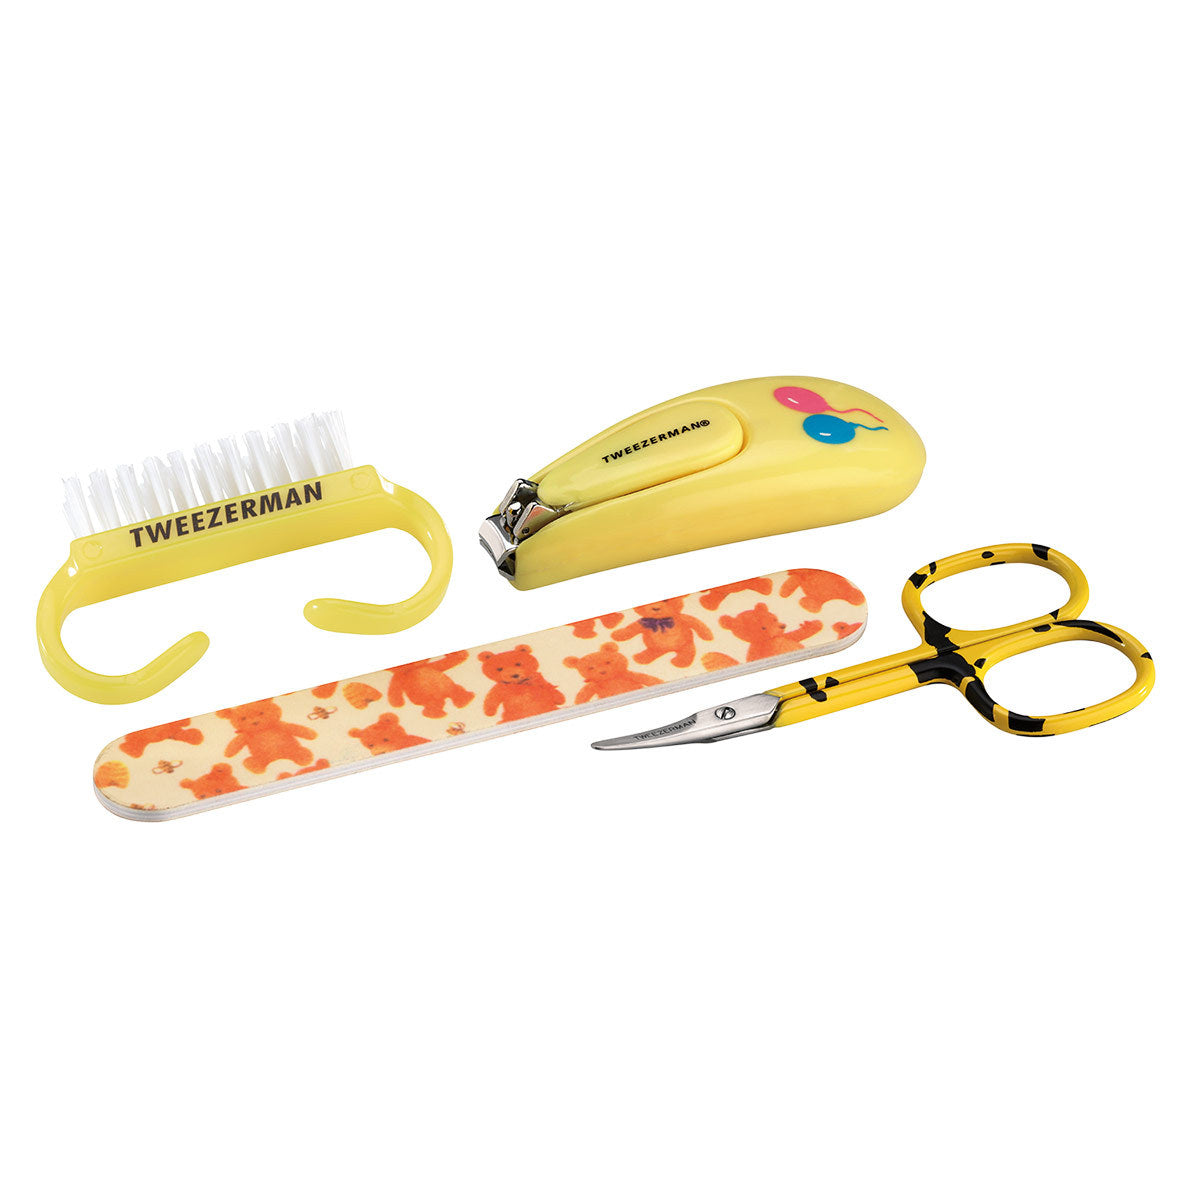 Primary image of Baby Manicure Kit